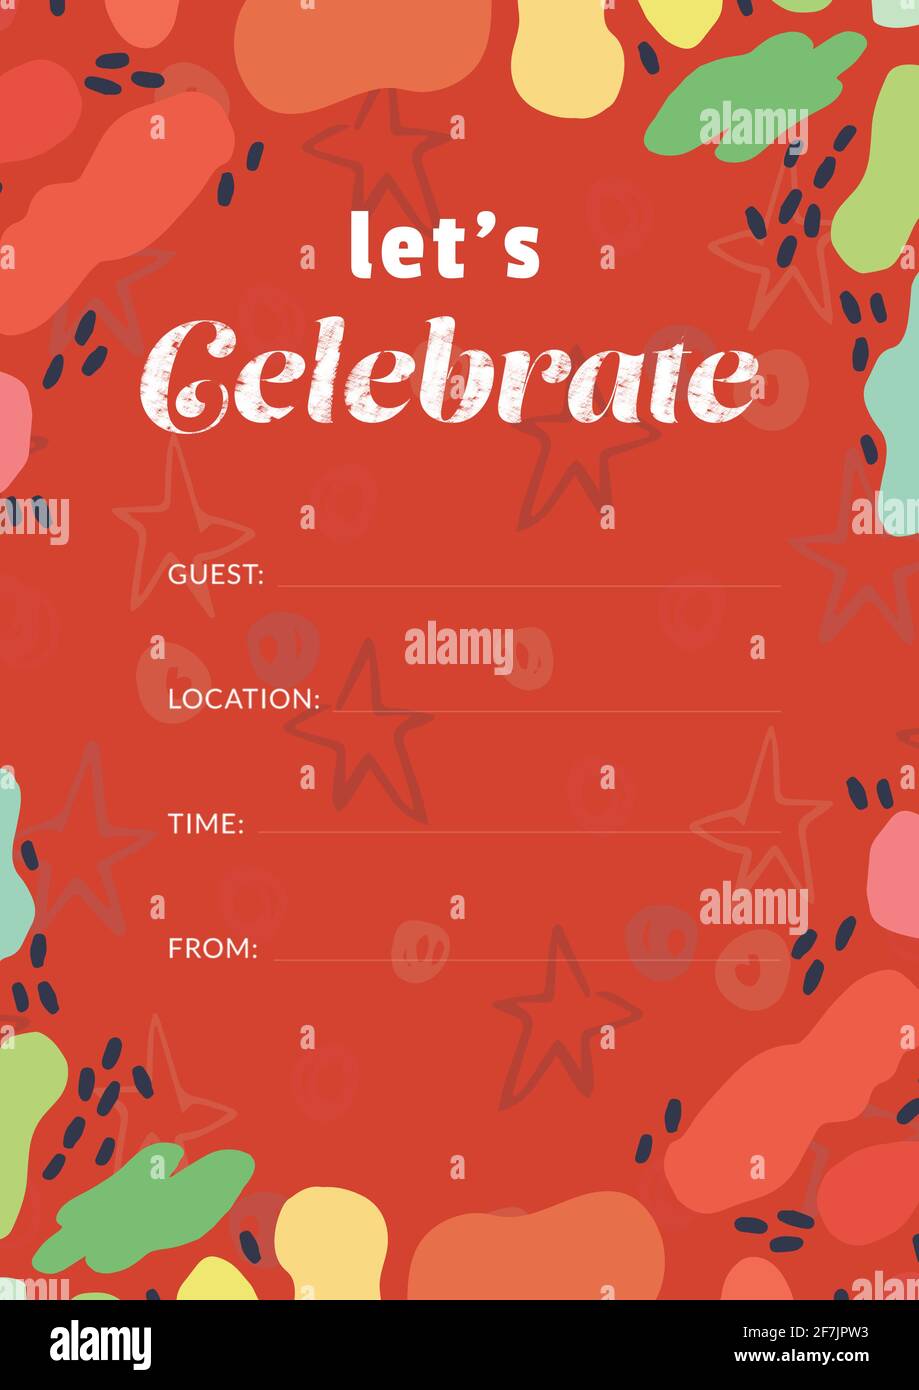 Let's celebrate written in white with colourful shapes, invite with details space on red background Stock Photo